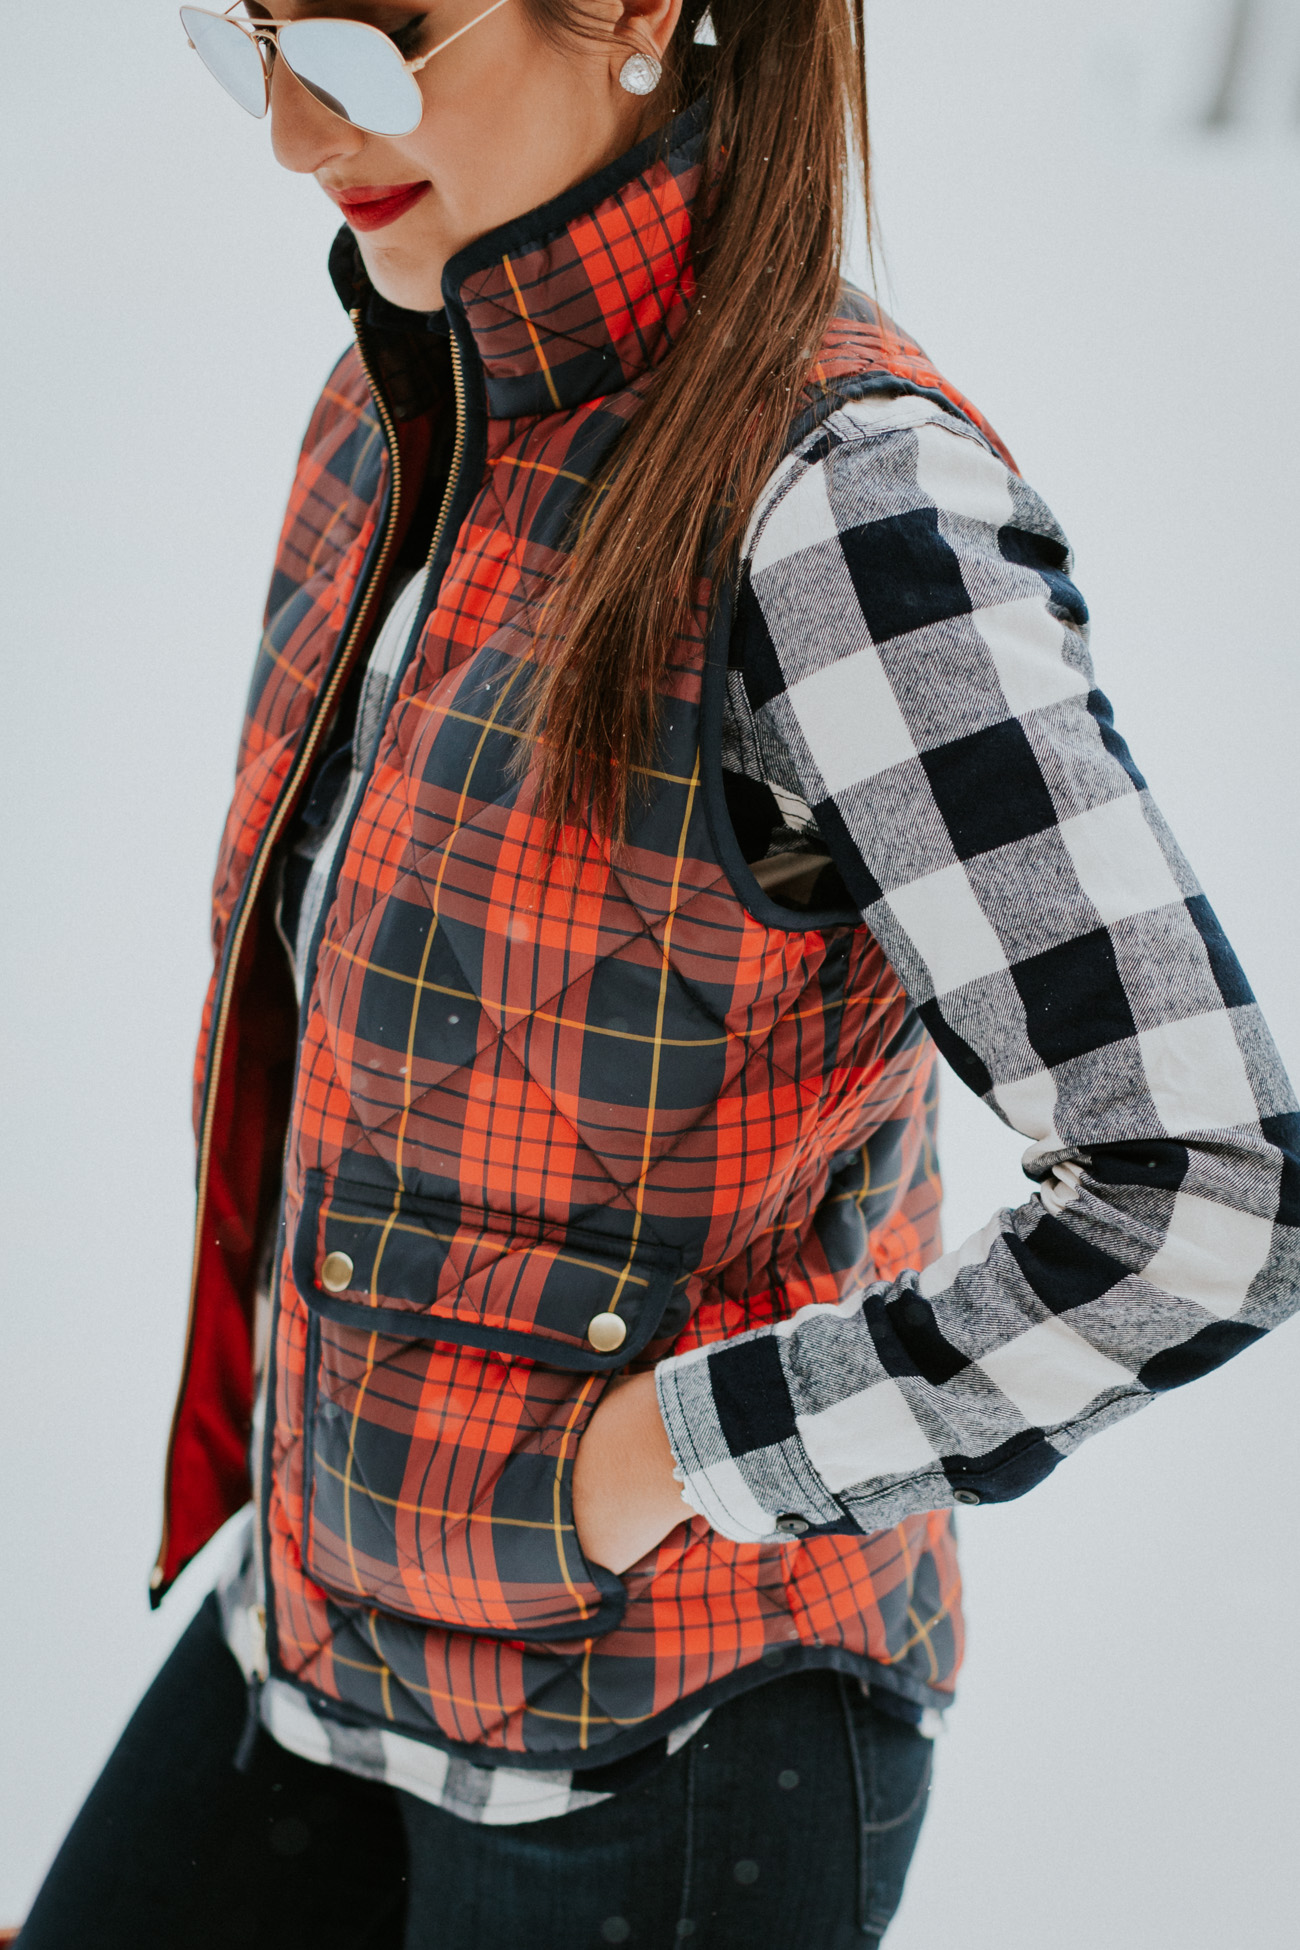 tartan plaid vest, buffalo check shirt, buffalo plaid shirt, buffalo check shirt jacket, j.crew plaid vest, j.crew excursion vest, red duckboots, red sperry duck boots, red sperry saltwater boots, holiday fashion, holiday style, holiday outfit, snow outfit, vail colorado, red tory burch tote // grace wainwright a southern drawl